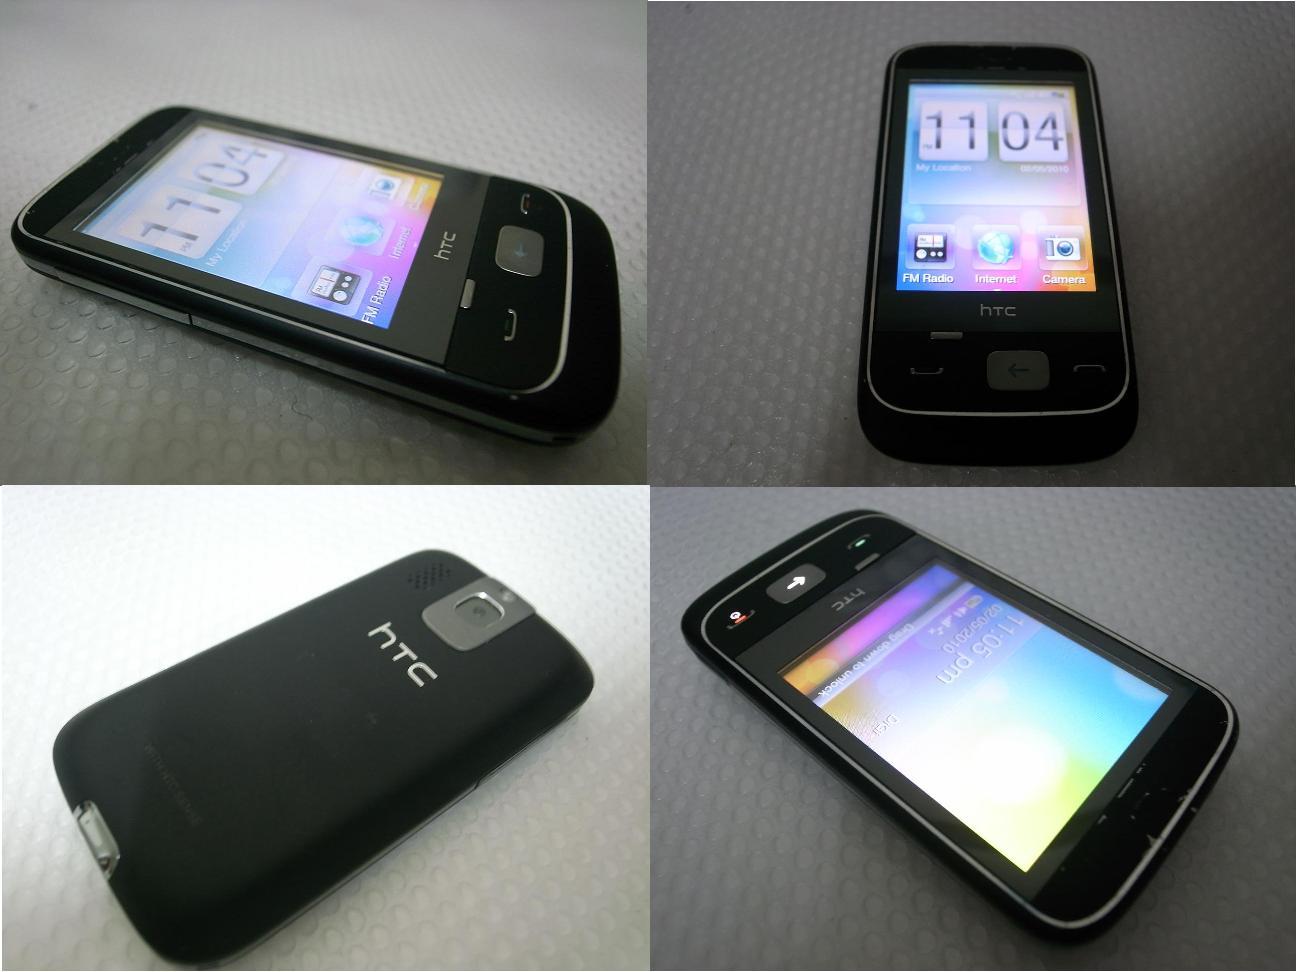 HTC SMART.F3188 Touch.Brand New.Fixed Price. - 01684847865. large image 1